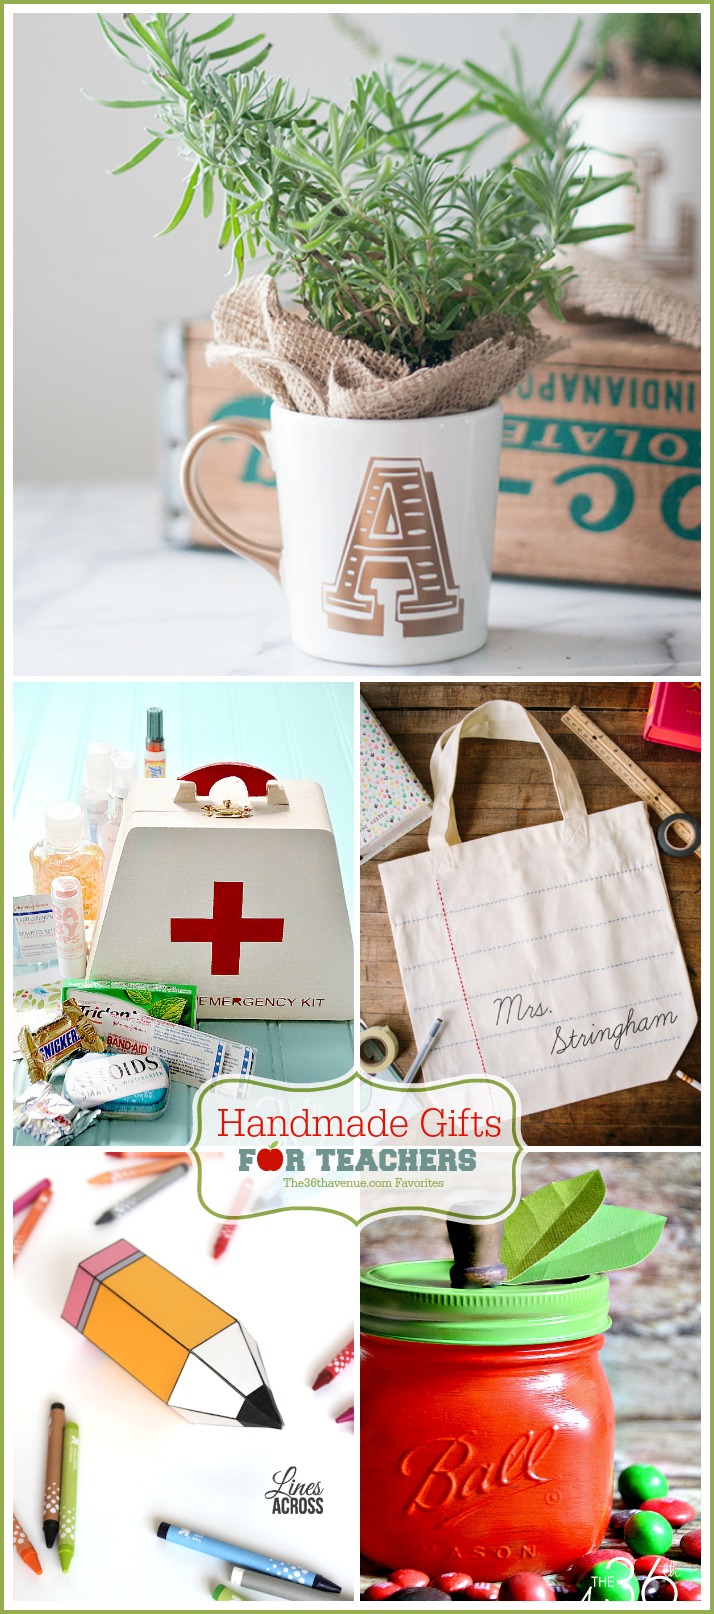 Handmade Gifts for Teachers at the36thavenue.com